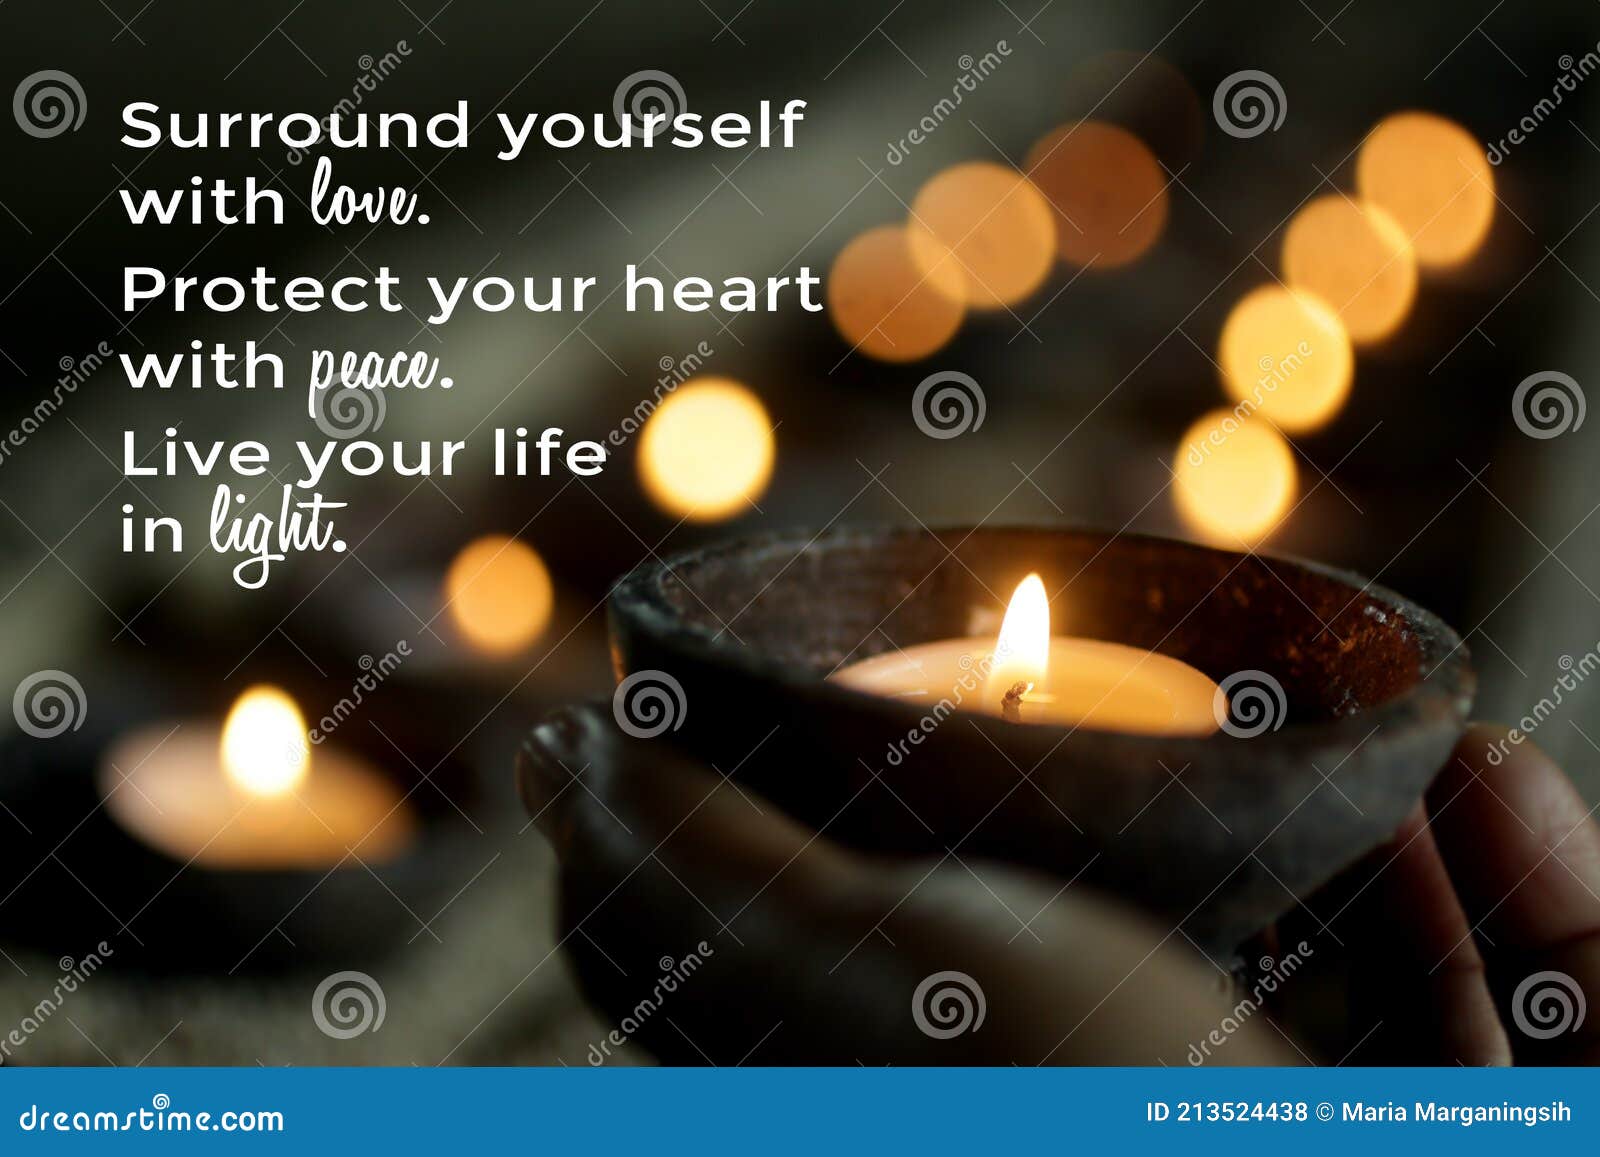 inspirational motivational quote - surround yourself with love. protect your heart with peace. live your life in light.